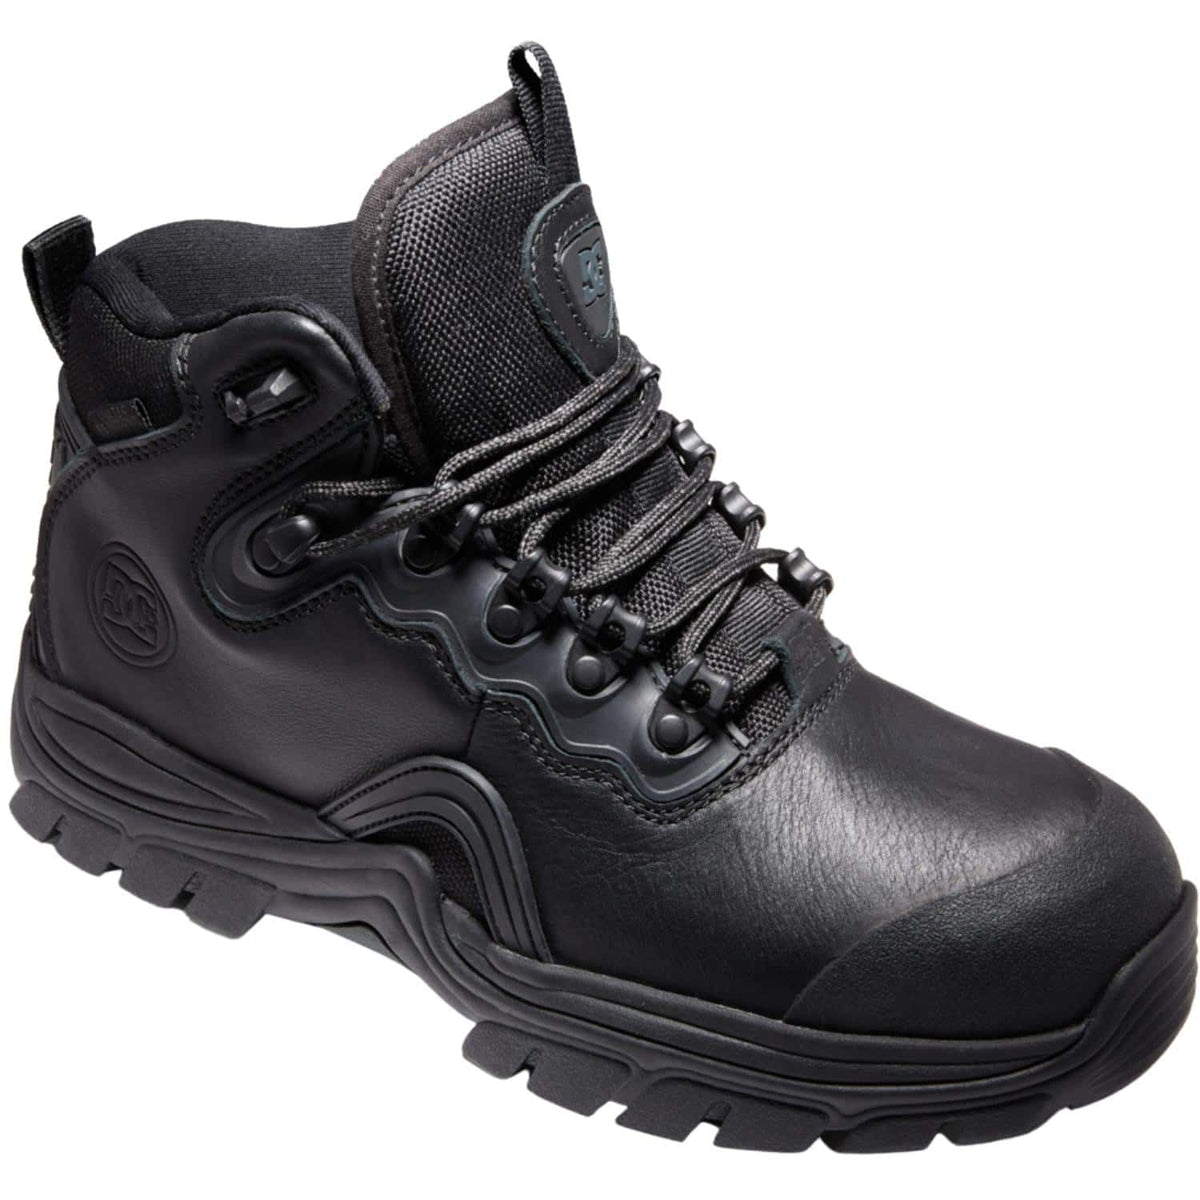 DC Navigator LX Leather Boots - Black/Black - Mens Boots by DC